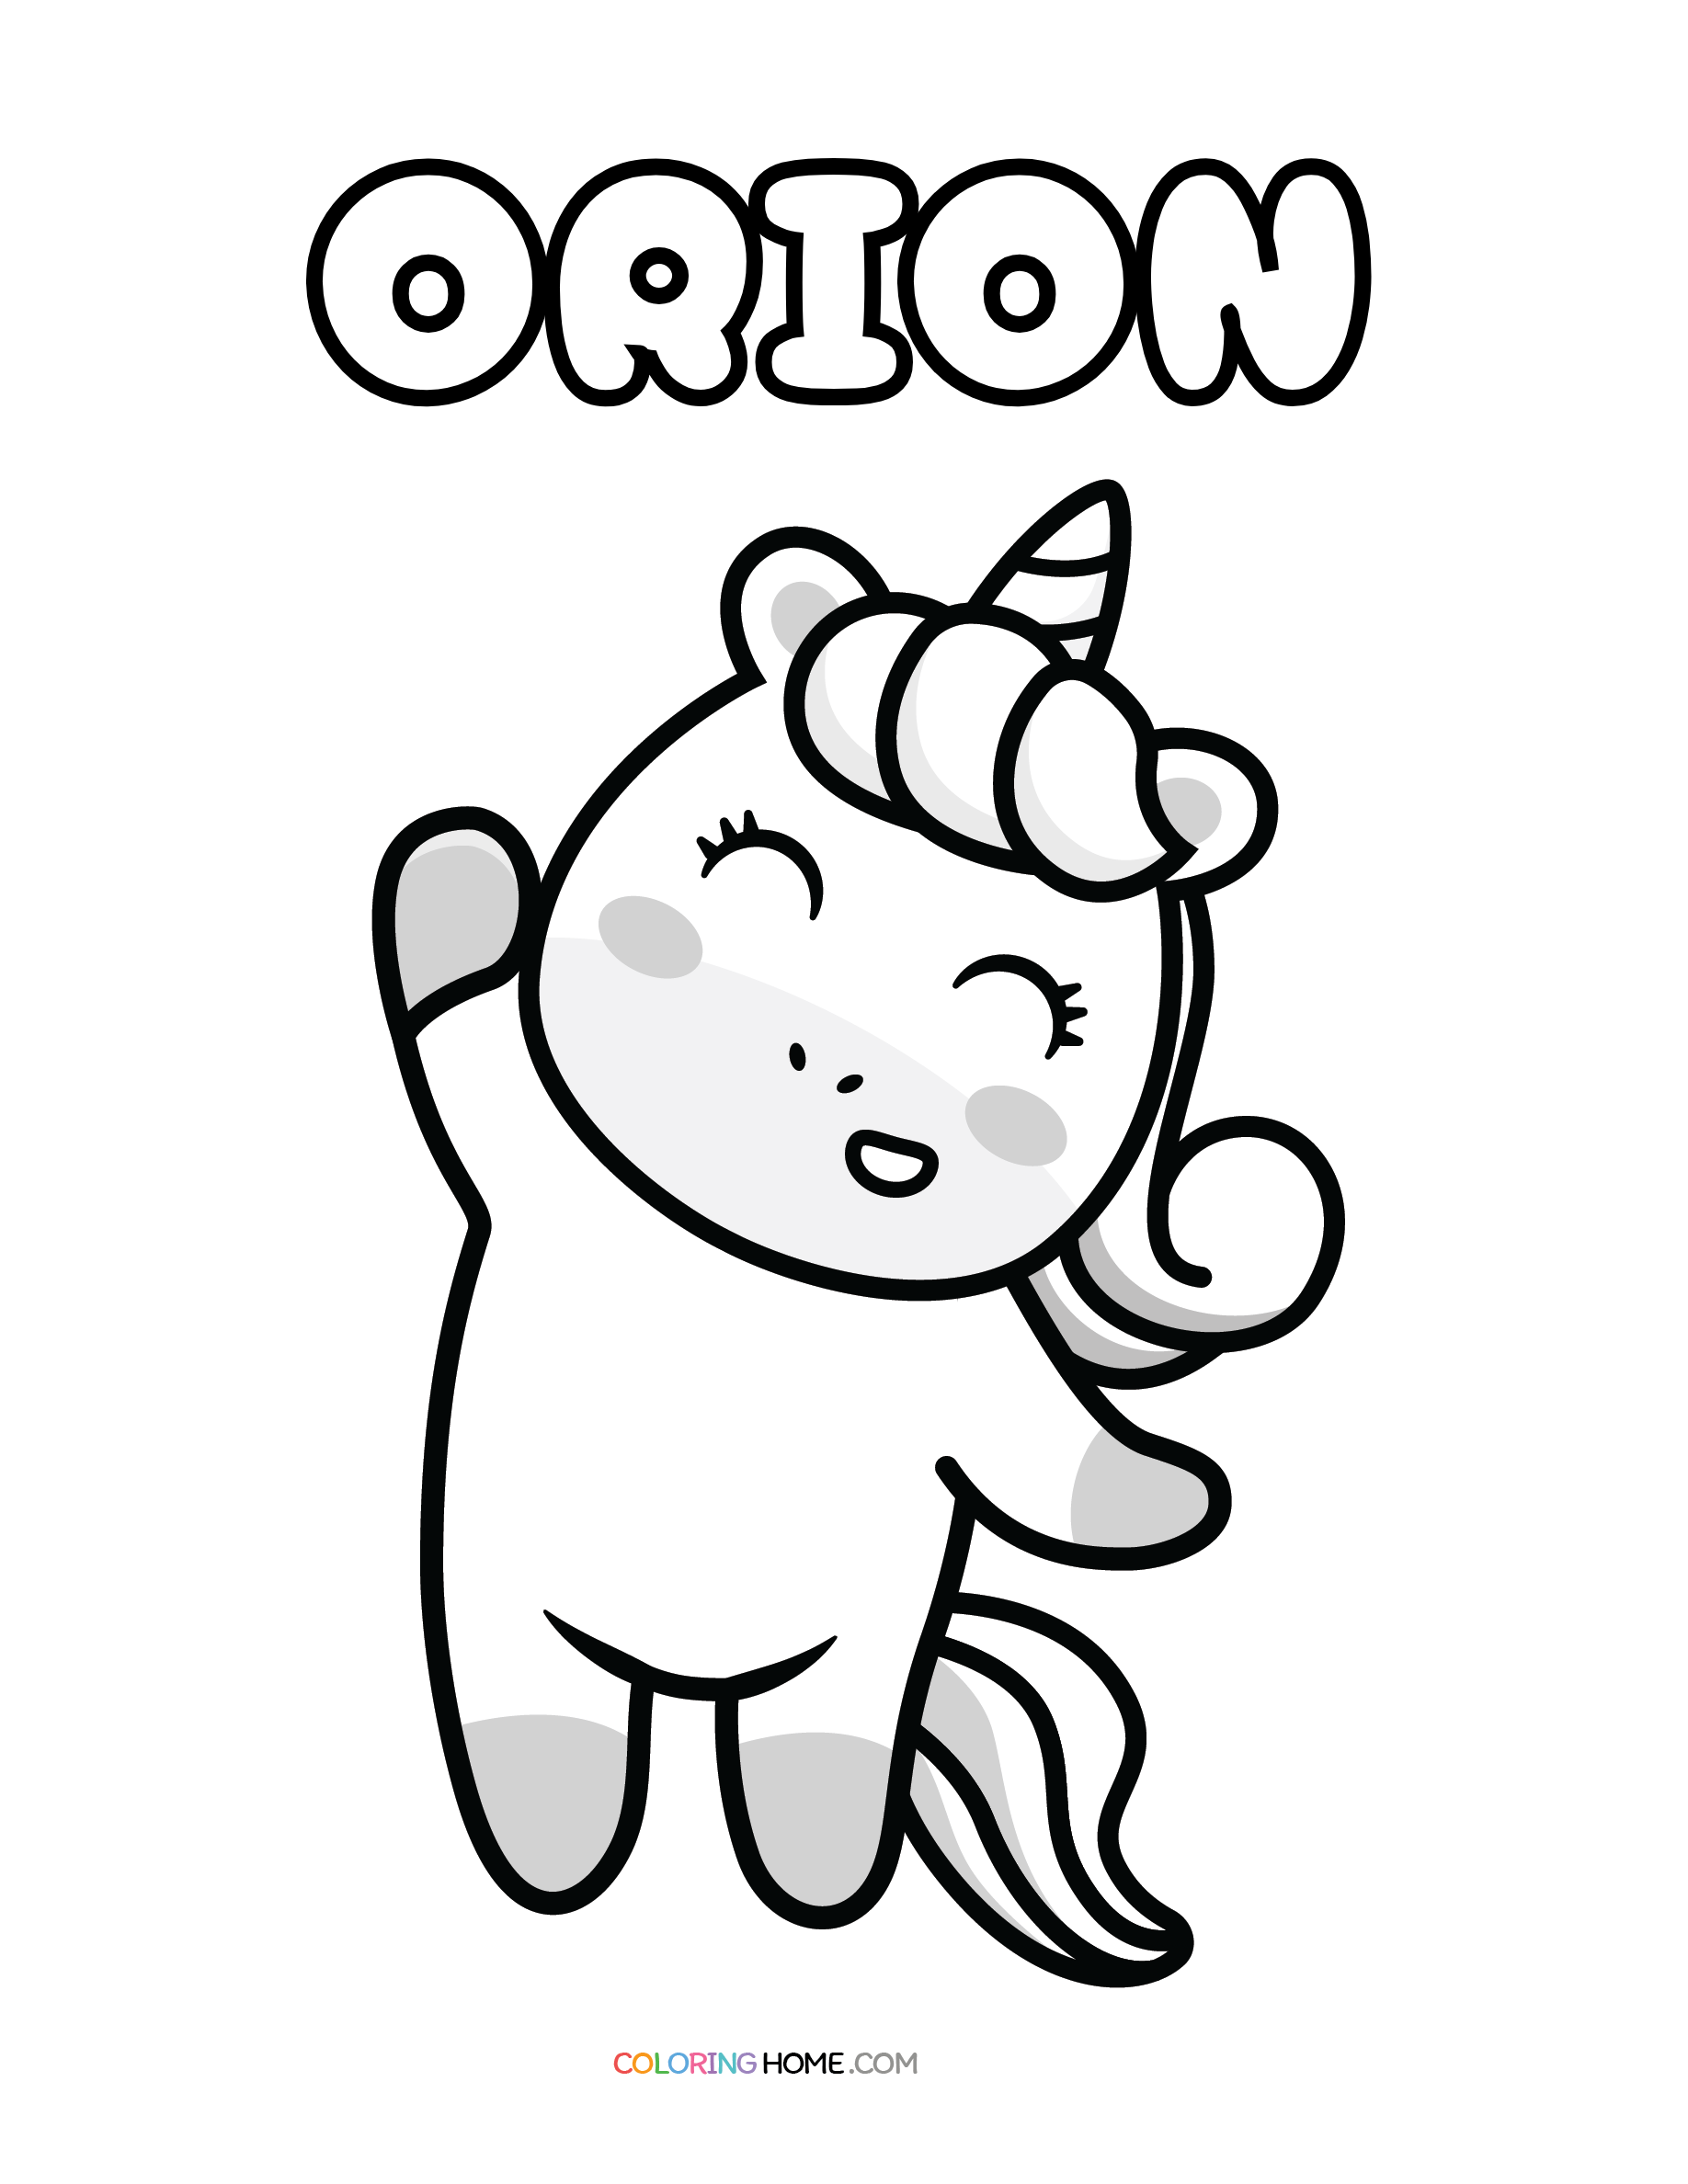 Orion unicorn coloring page